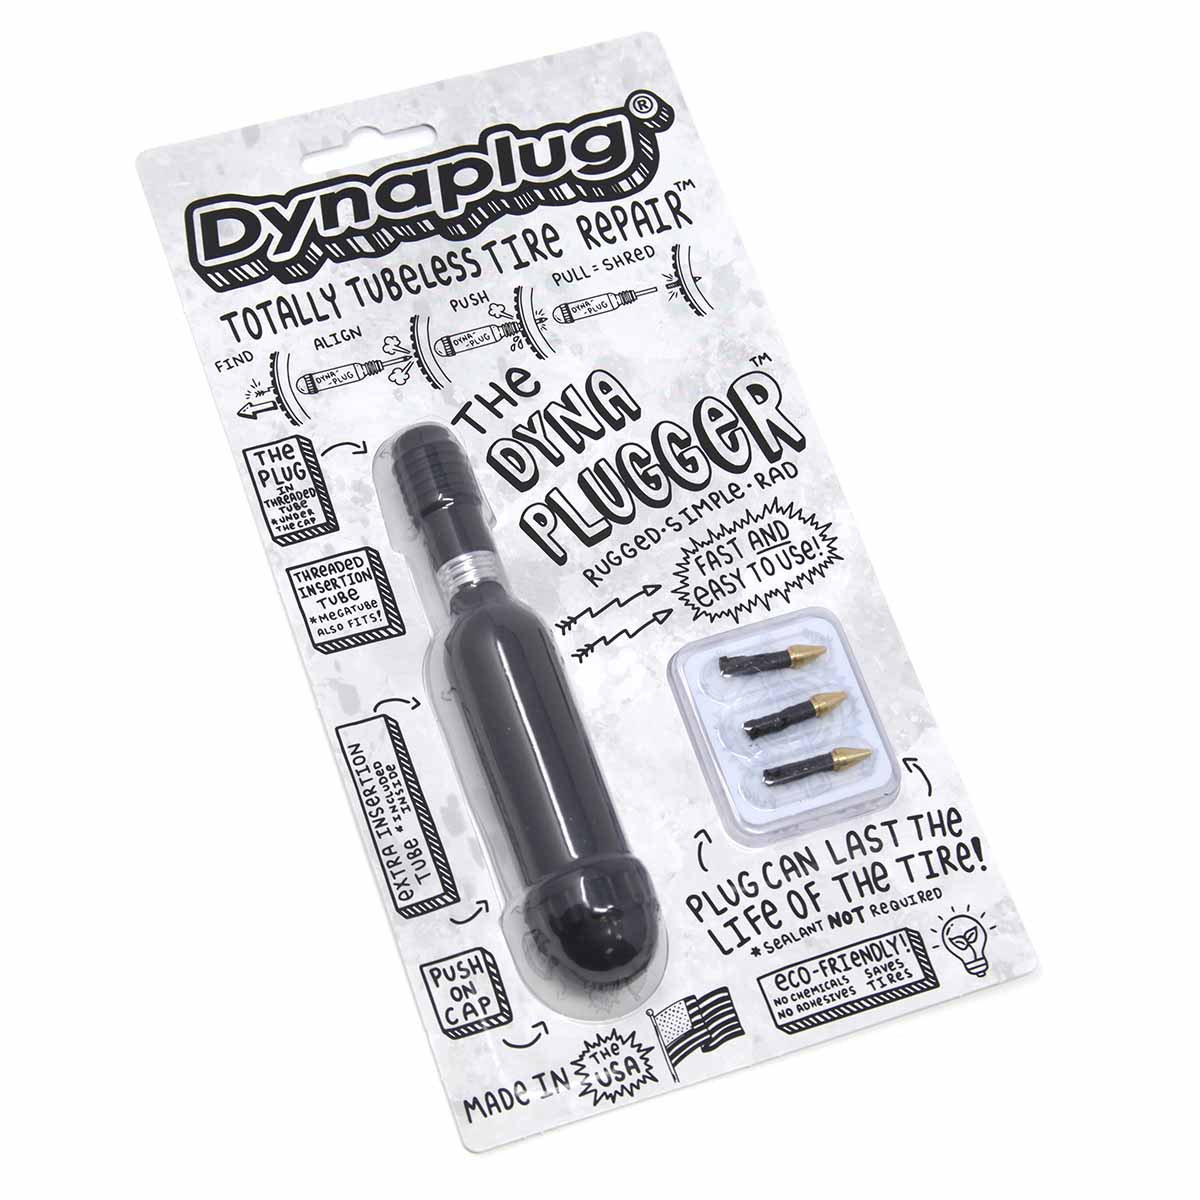 dynaplug Dynaplugger affordable tire plugging tool for repairing tubeless tire flats